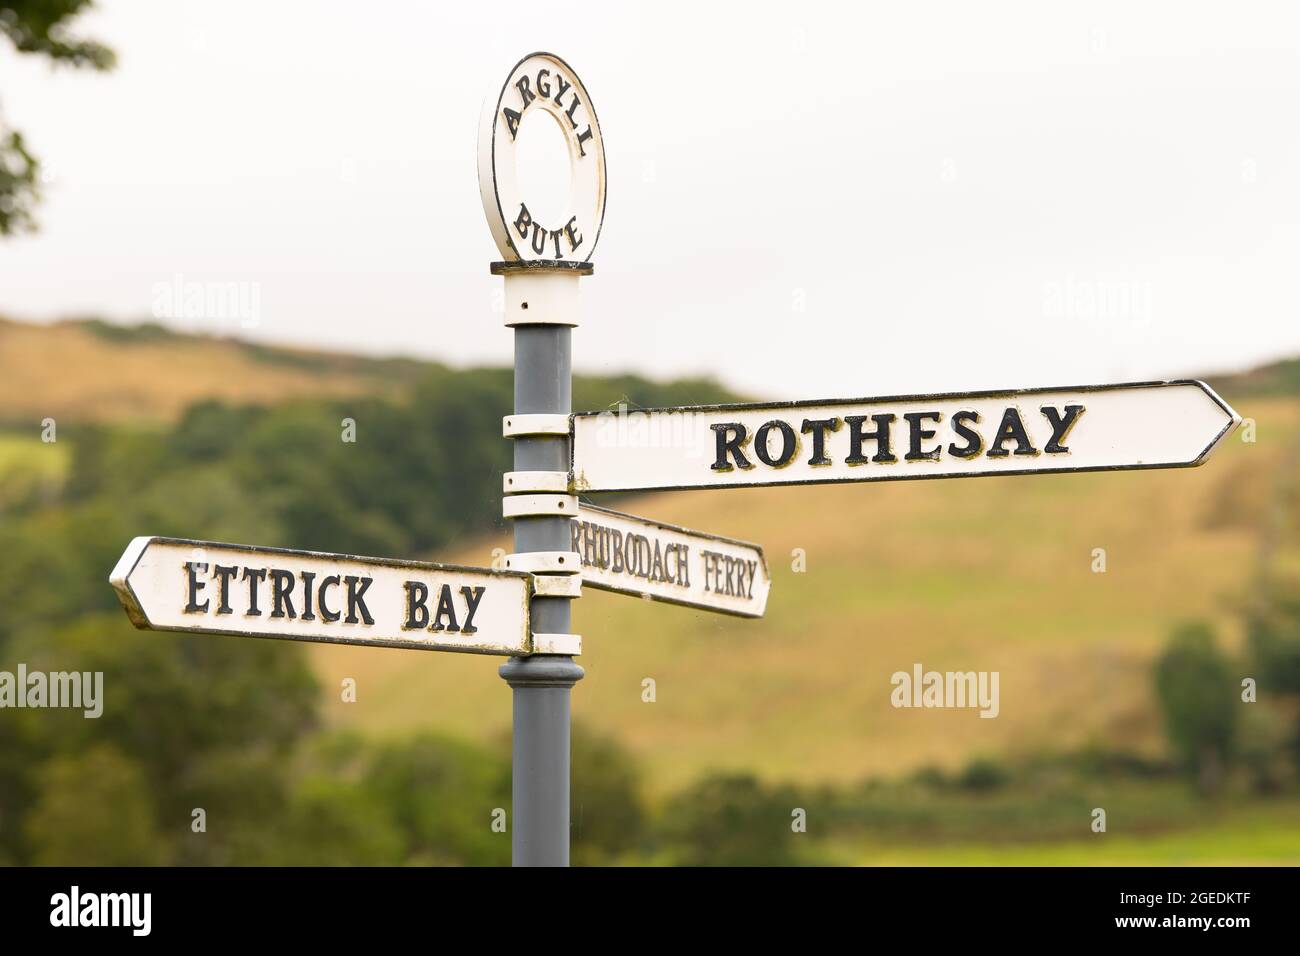 Isle of Bute road sign pointing to Rothesay, Rhubodach Ferry and Ettrick Bay, Argyll and Bute, Scotland, UK Stock Photo